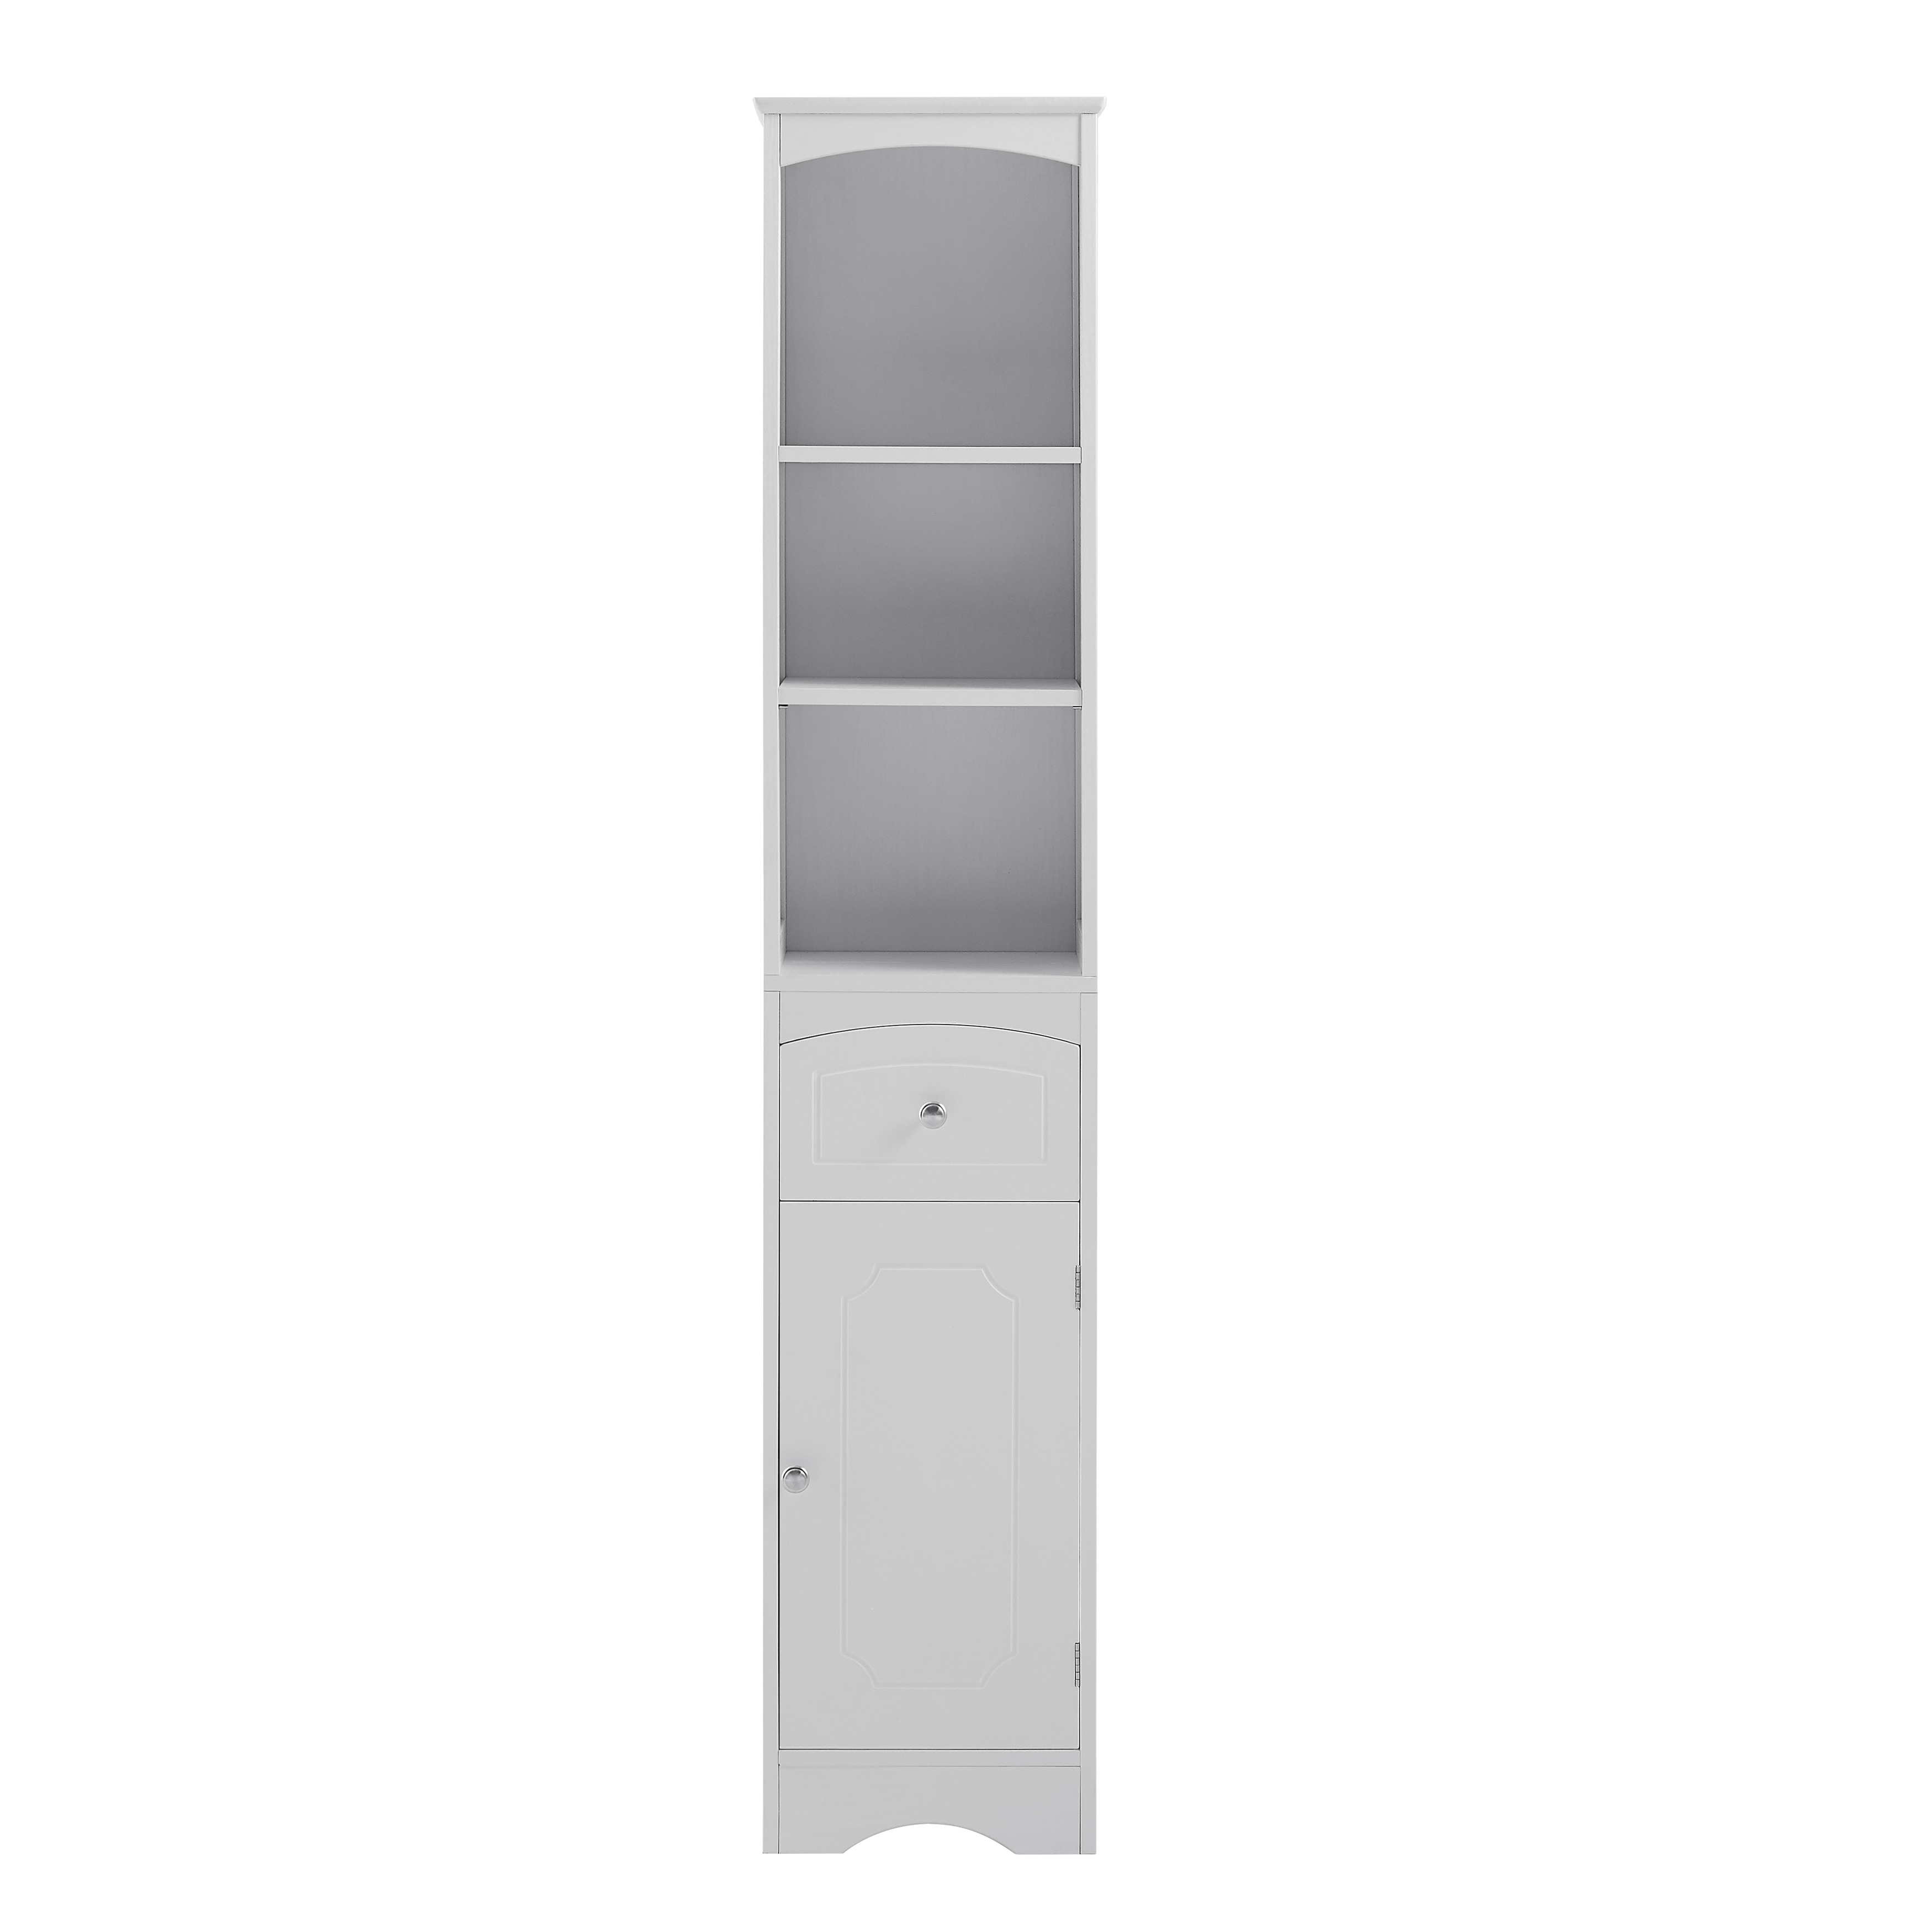 https://ak1.ostkcdn.com/images/products/is/images/direct/951b1cd6fd473786ad8aac1dc9e0b5de41e87633/Nestfair-Freestanding-Bathroom-Cabinet-with-Drawer-and-Adjustable-Shelf.jpg